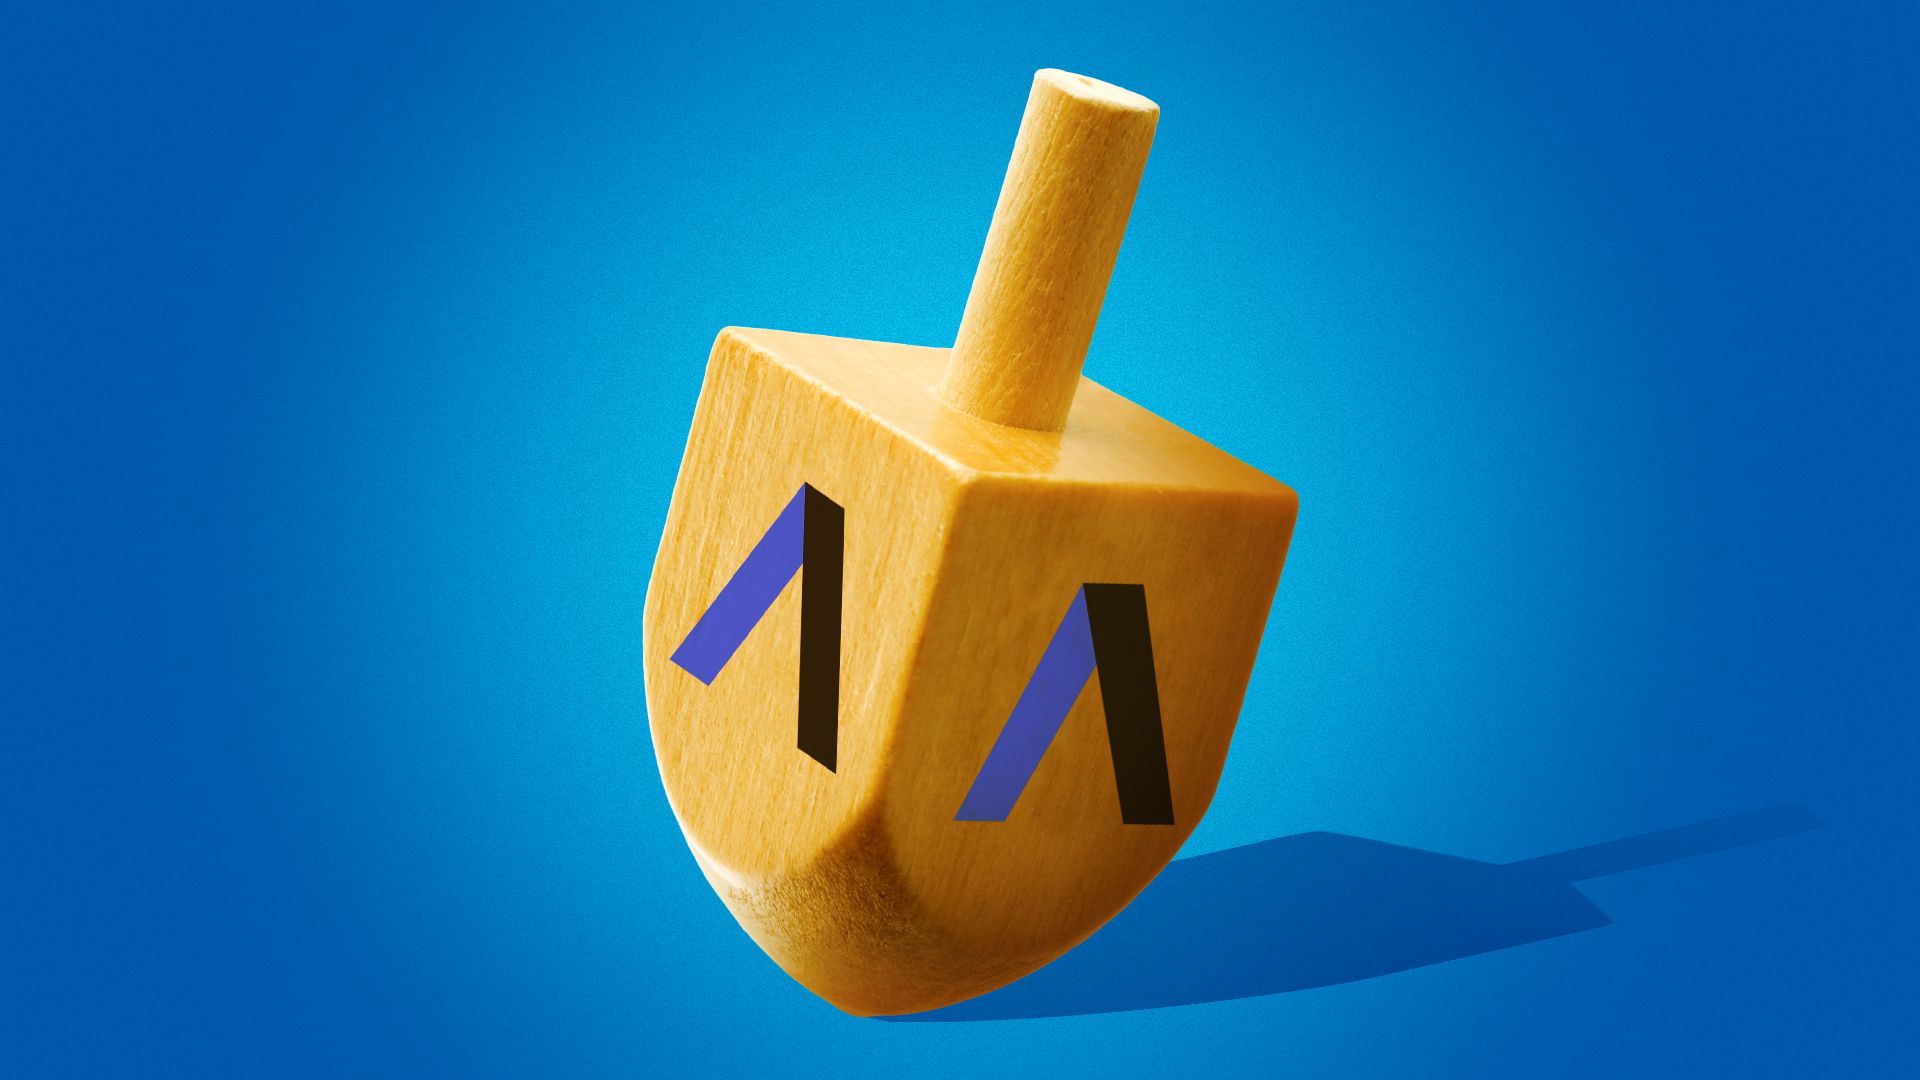 Illustration of a dreidel with Axios logos instead of Hebrew letters.